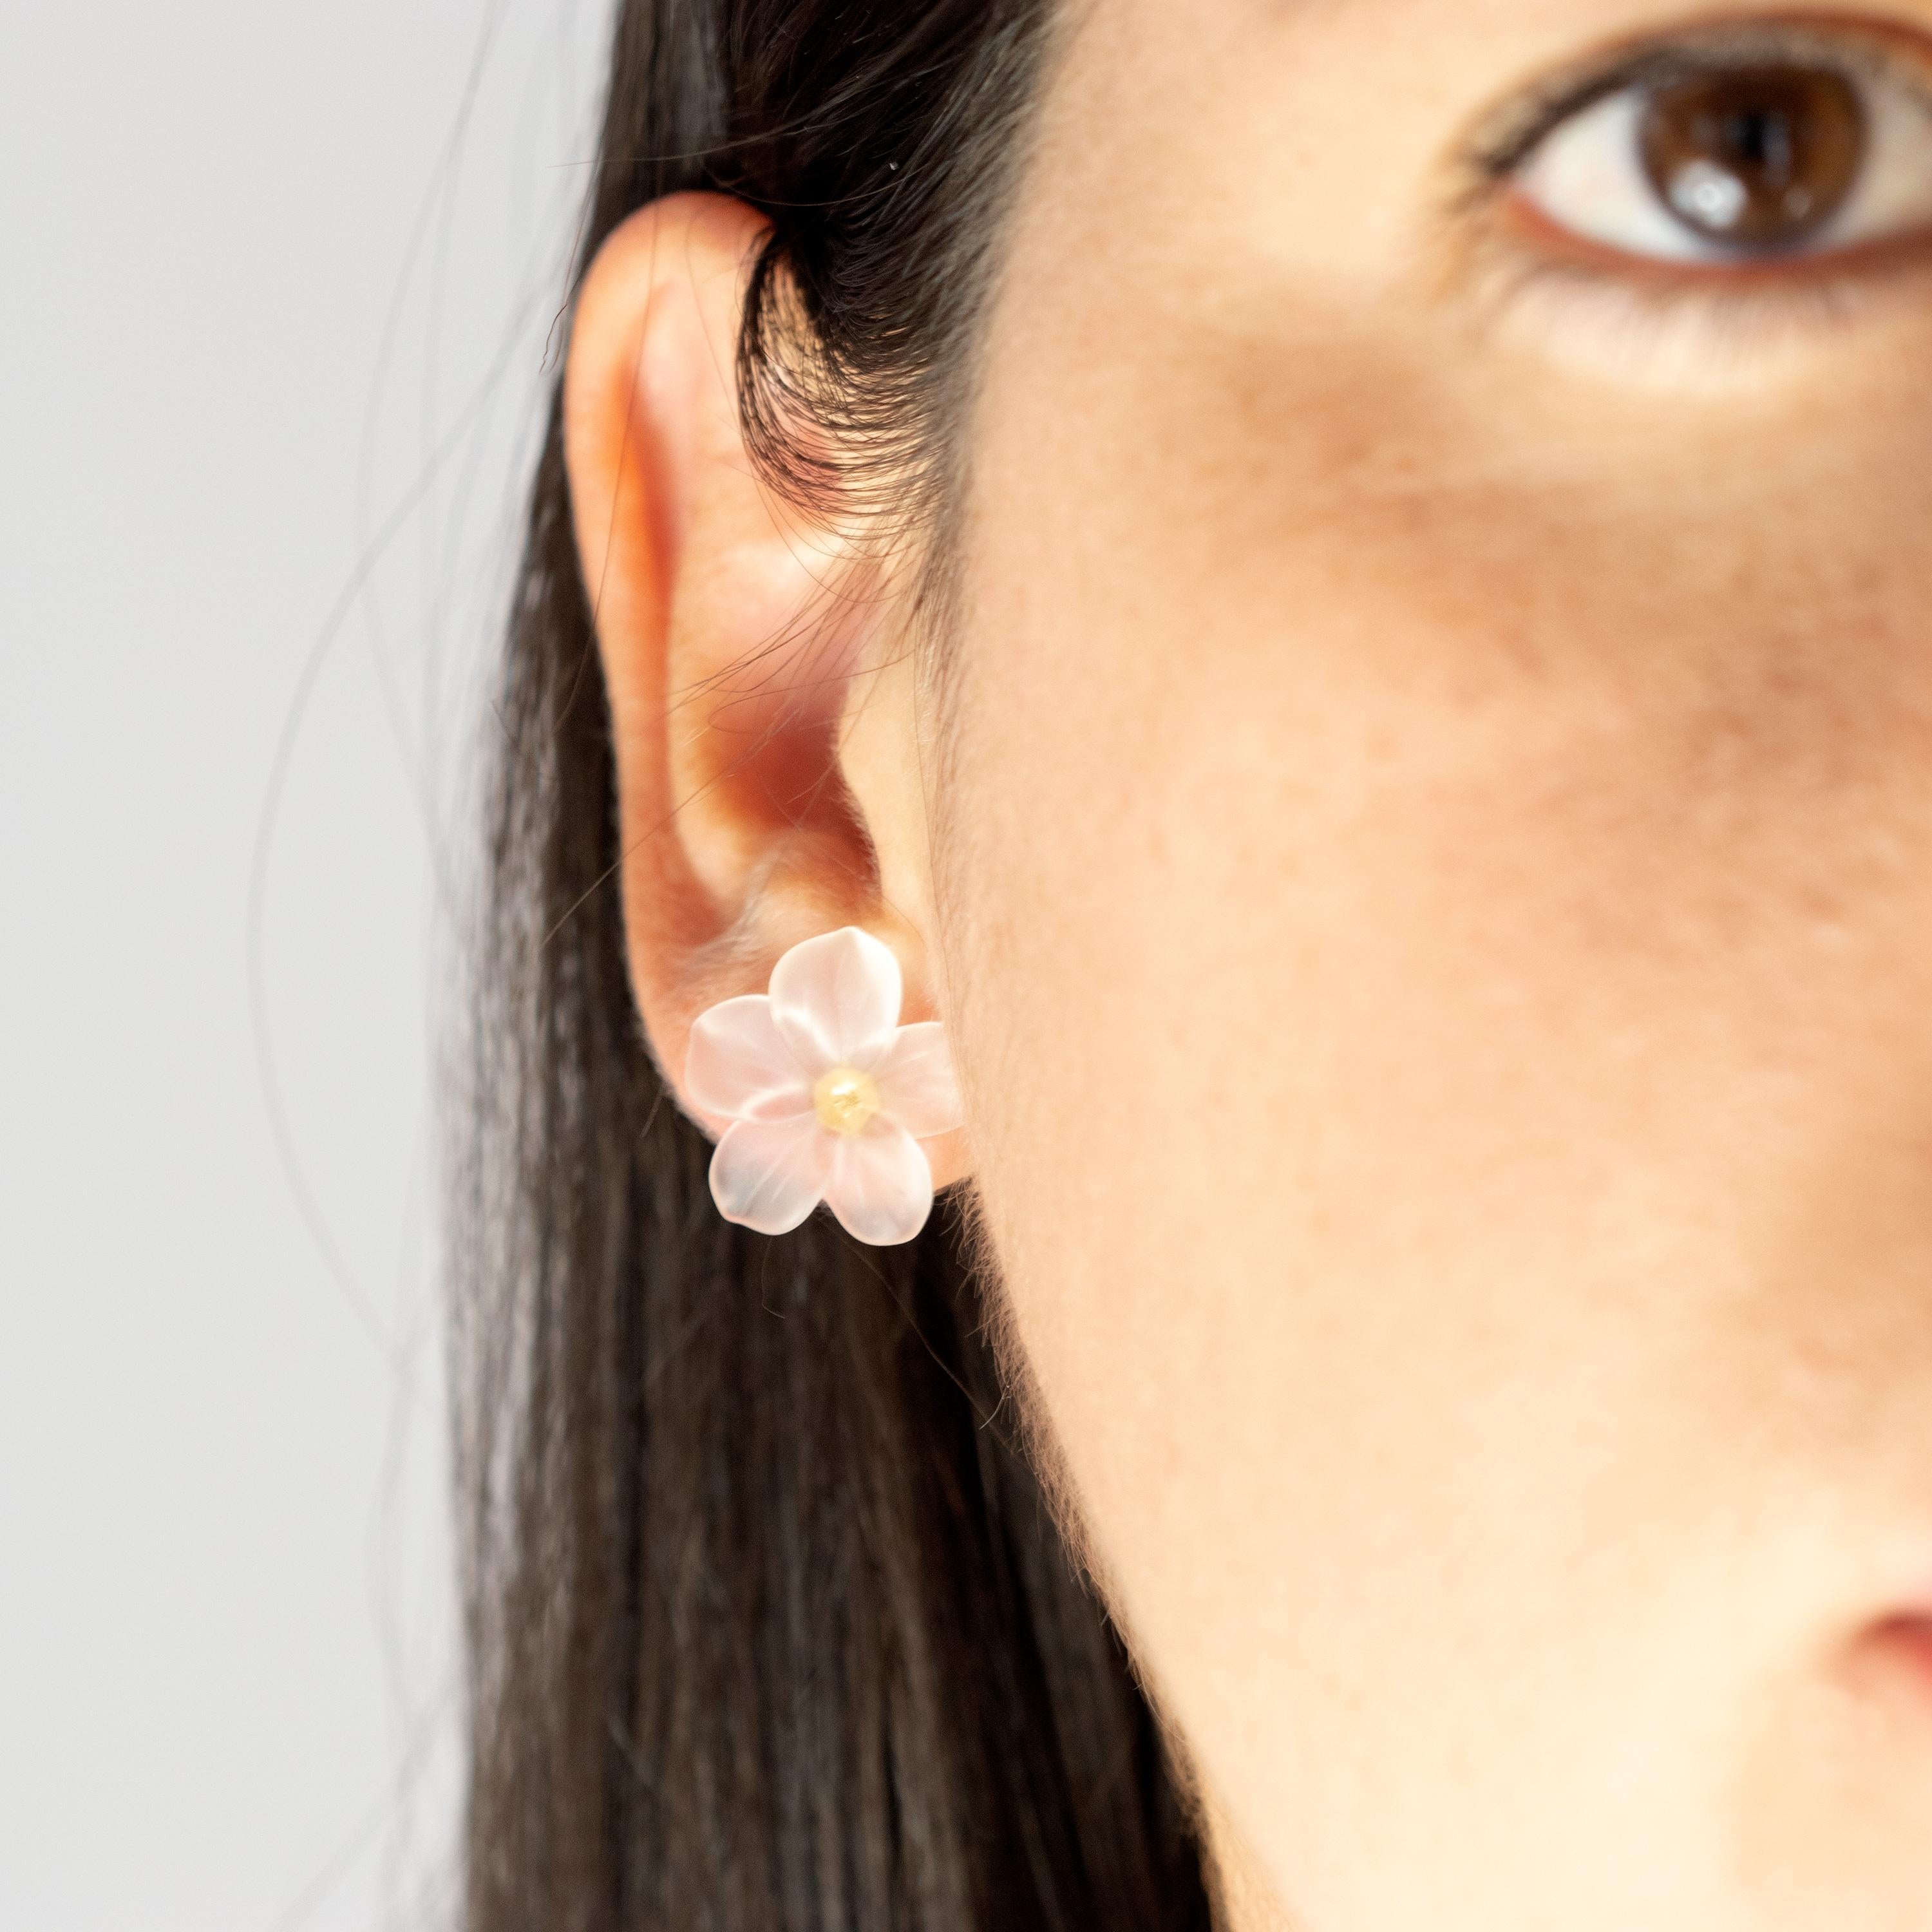 Astonishing and delicate 11.6 ct rock crystal flower. Stud earrings embellished with a modern and exquisite style. Carved petals that evoke the italian handmade traditional jewelry work, wrapping itself in a soft look enriched with gold plate